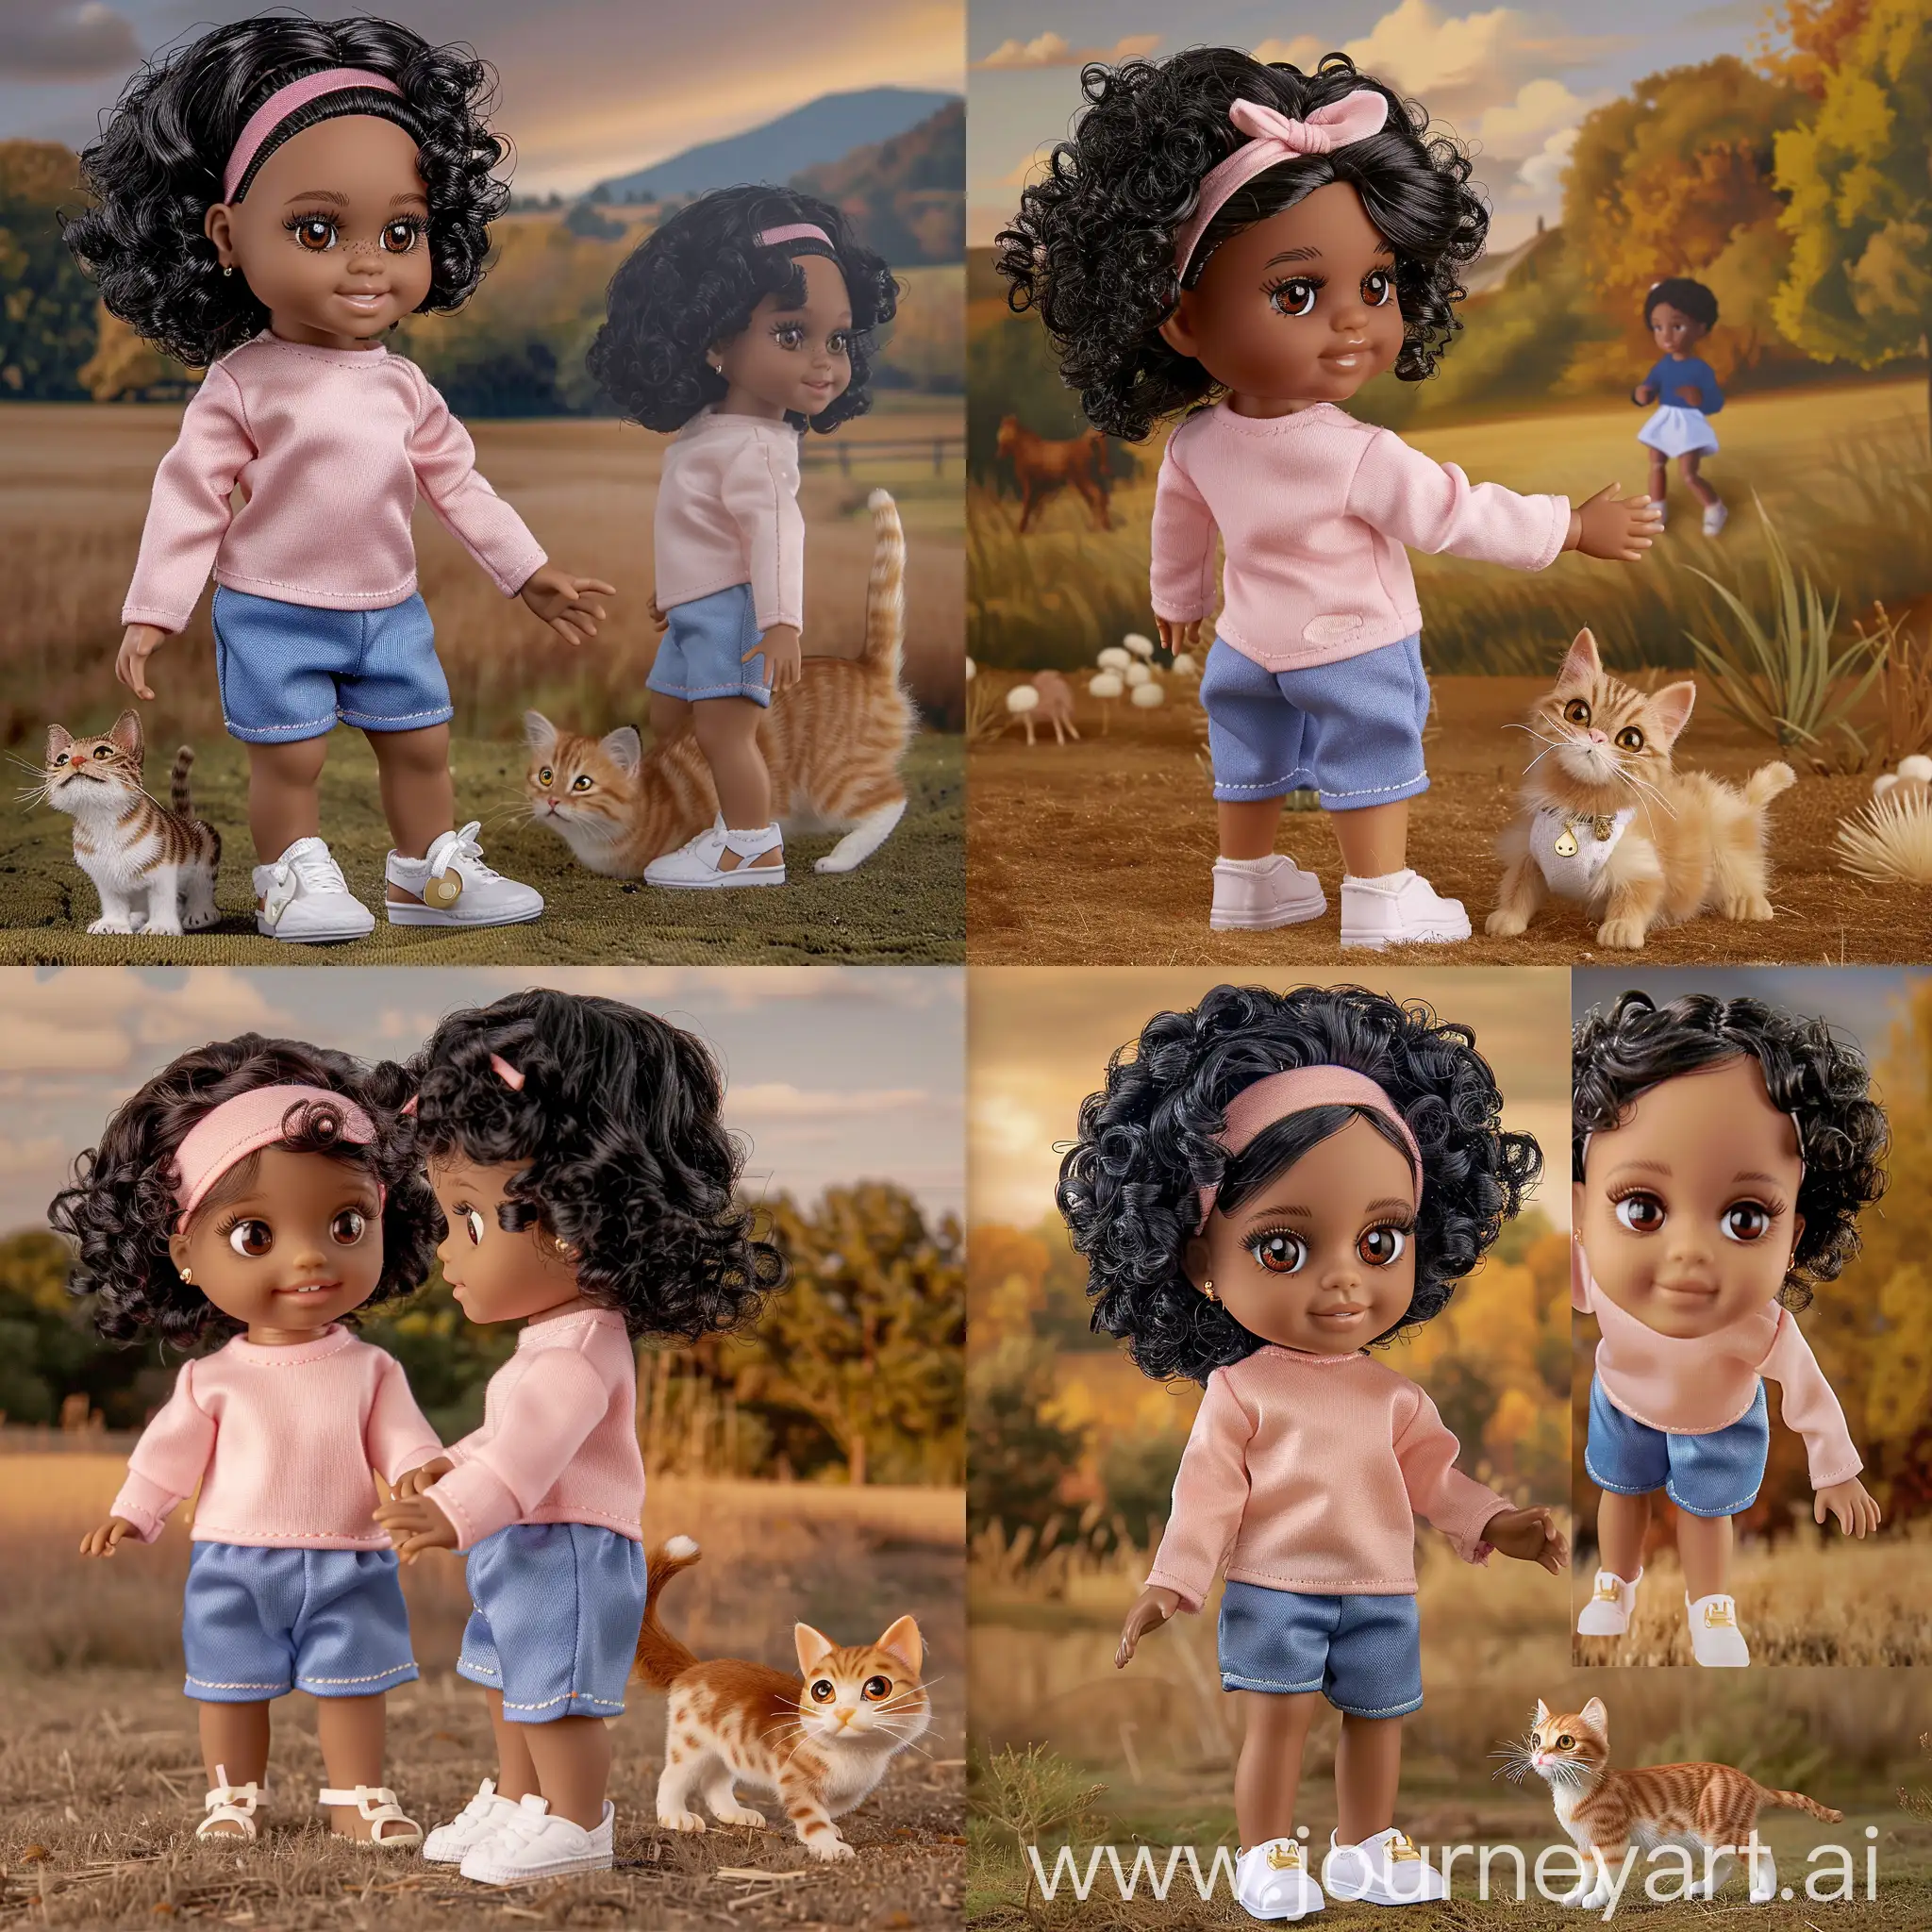 Create a 4-year-old black girl named Mia Brown - Description: big brown eyes, medium curly black hair, a well-structured face - Outfit: no earrings, pink headband, long-sleeved plain pink shirt, blue shorts no pockets, white doll shoes - Style: Whimsical and Playful- Multiple Poses: Front view, Side view, Back view - Action:  playing with a friendly cat in a field